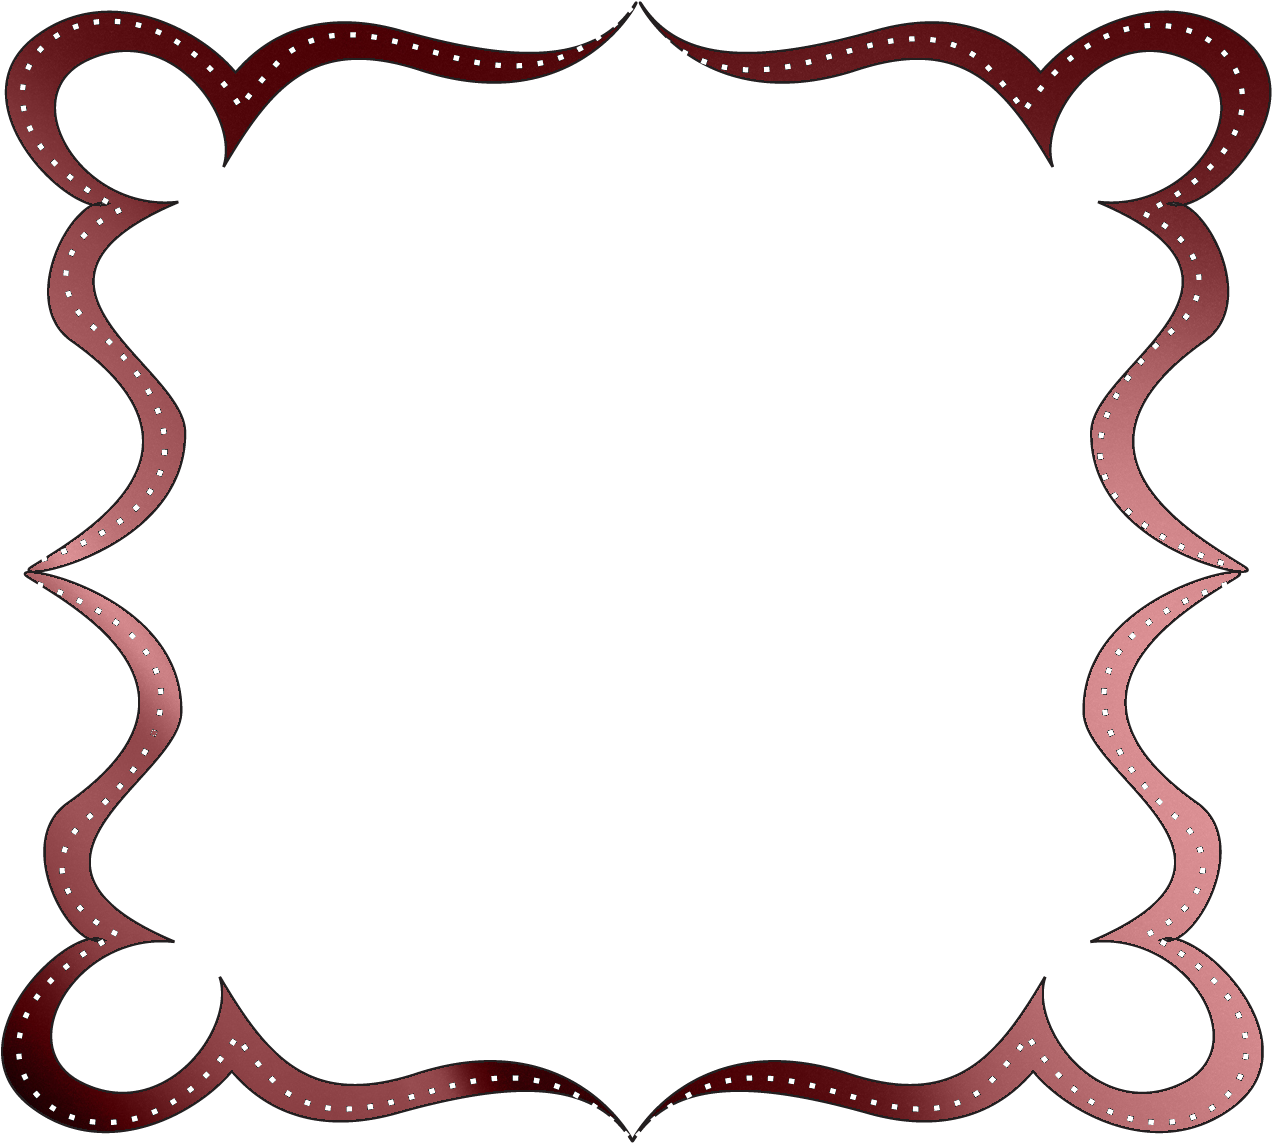 A Red And White Frame With Black Background